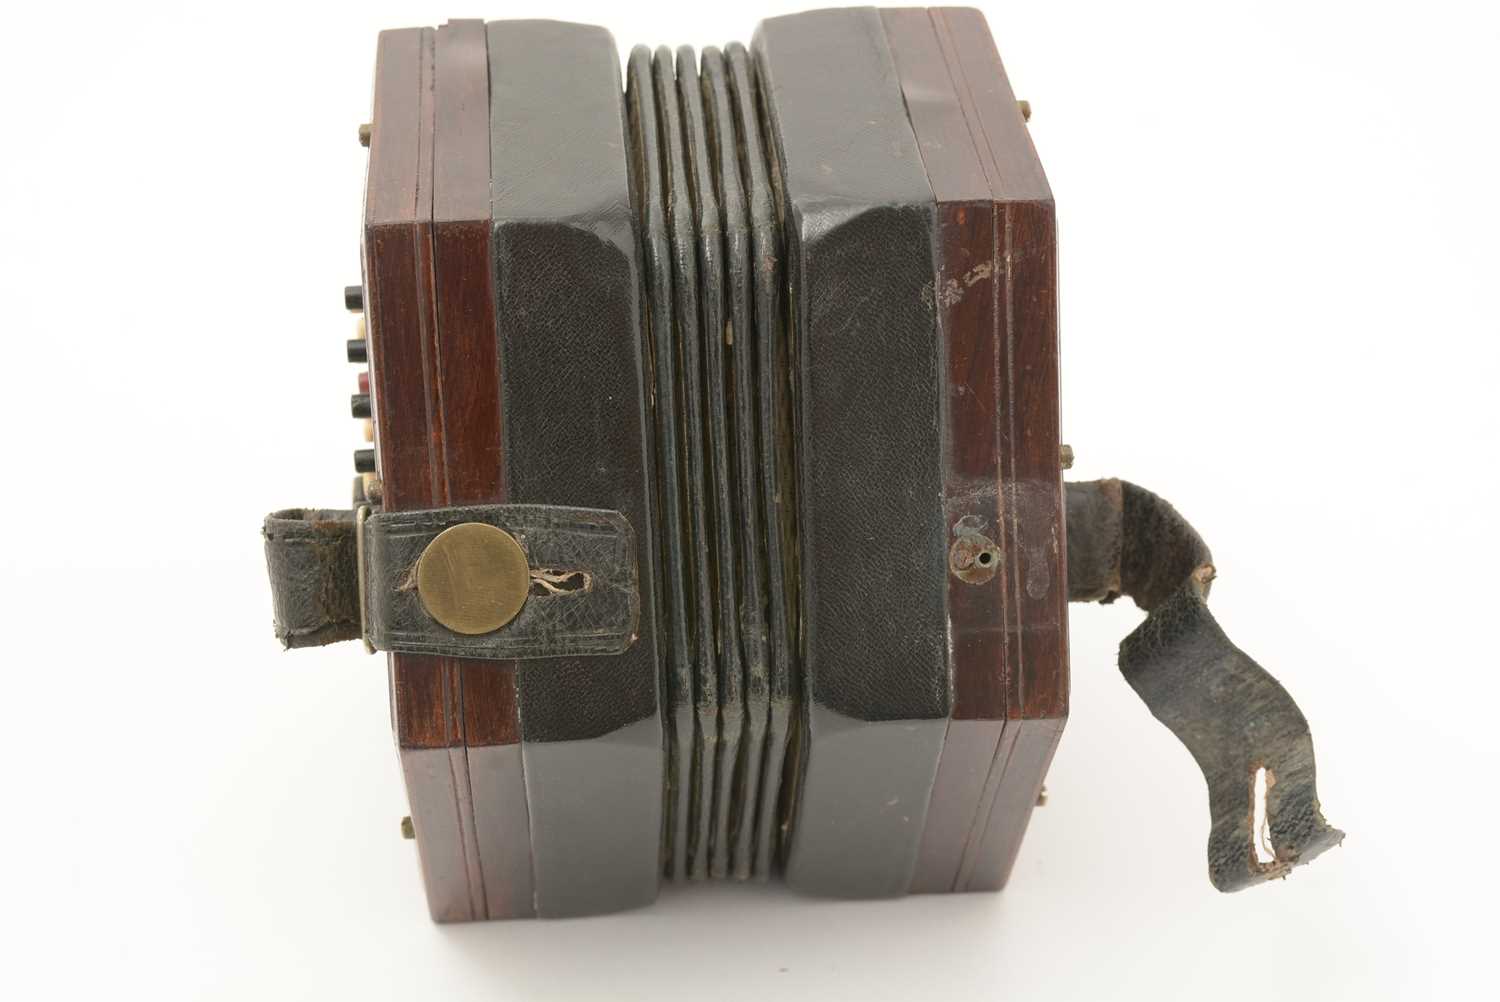 Lachenal 48 button English system concertina - Image 12 of 17